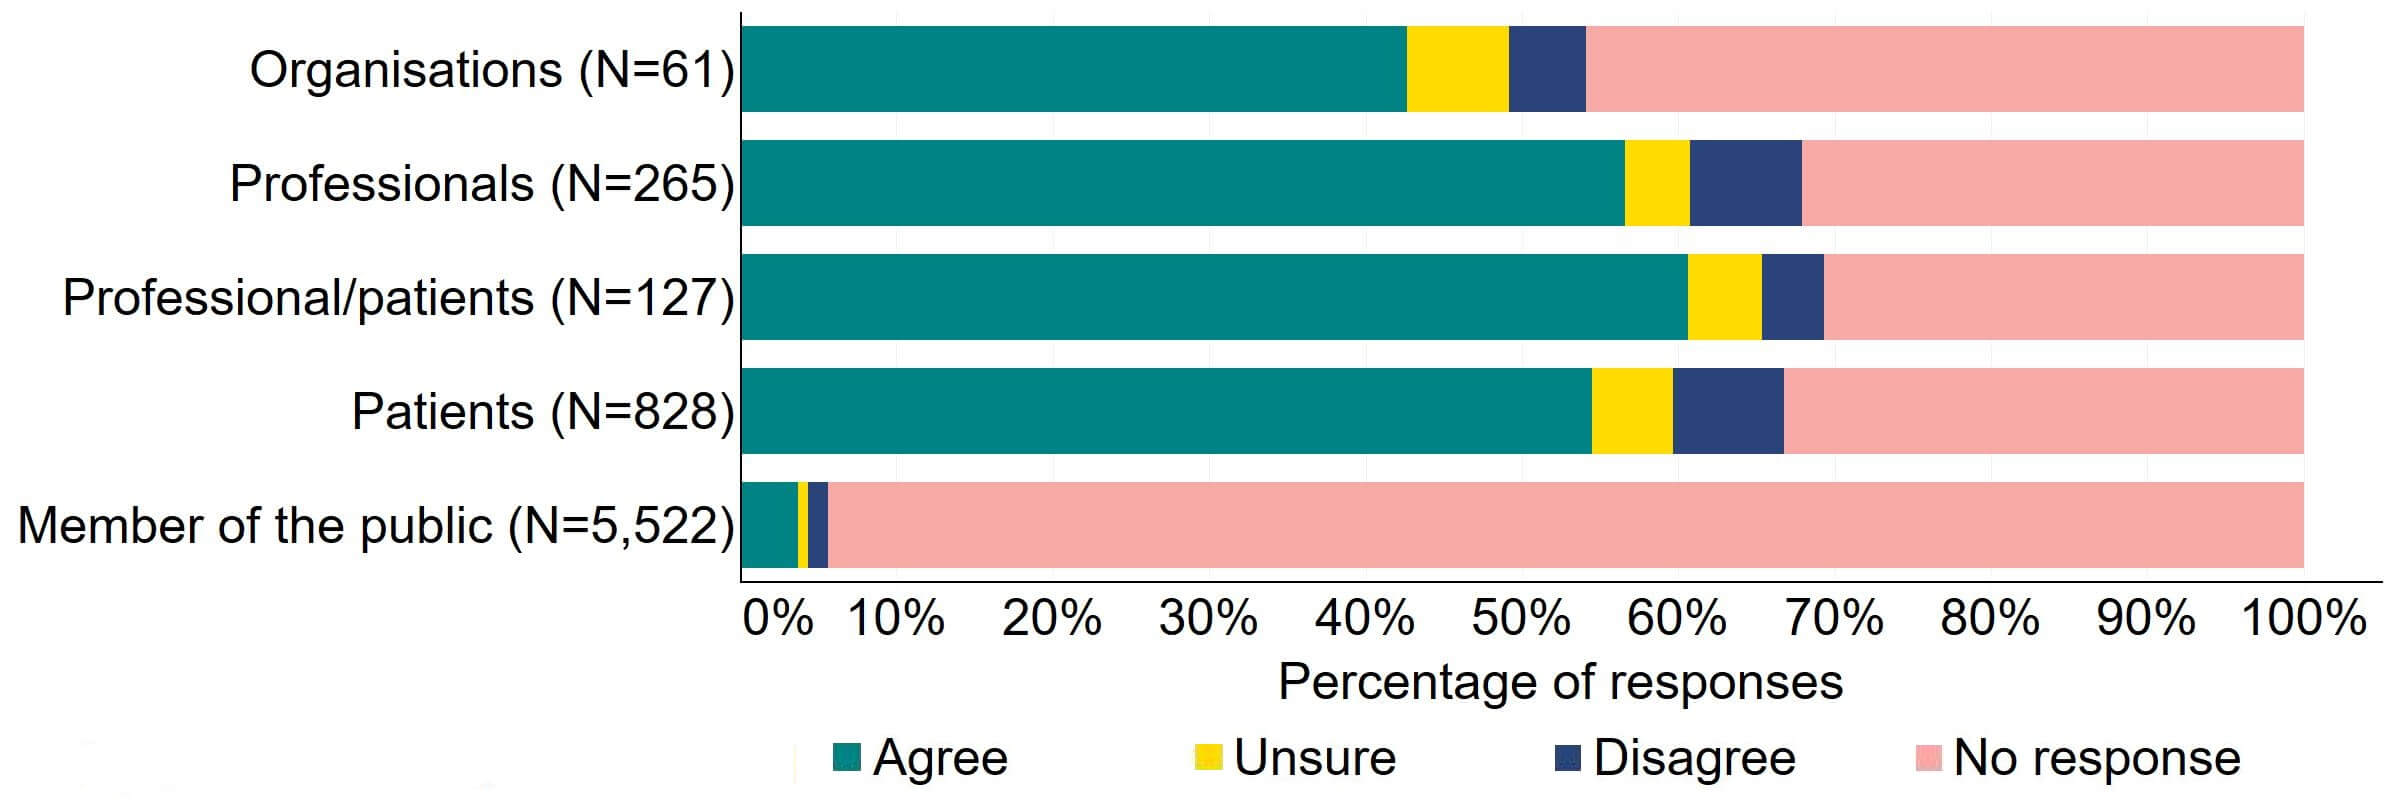 Figure 16 is a stacked bar chart showing the proportion of respondents in each response group who agreed, disagreed, were unsure, or who did not provide a response to the proposal. The underlying data can be downloaded as an Excel worksheet at the top of the page.